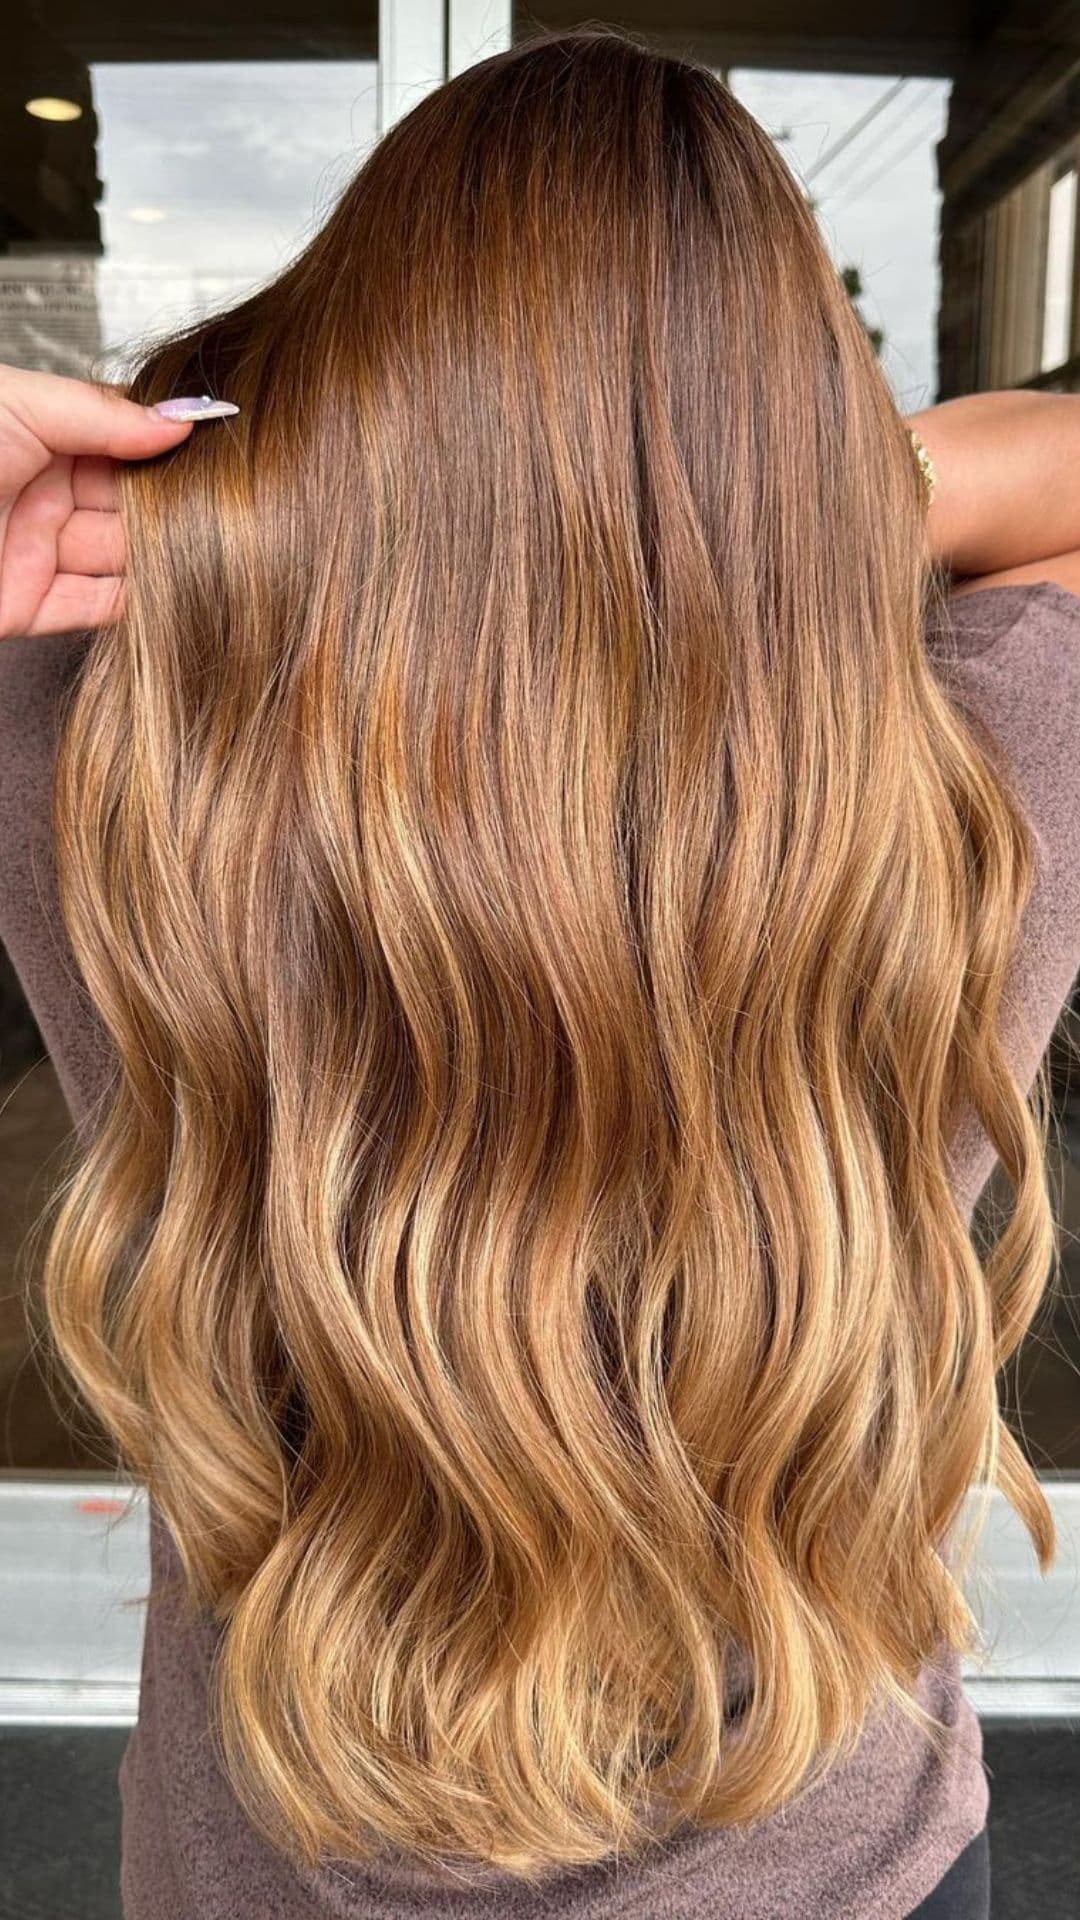 A woman modelling a toffee to honey ombre hair.